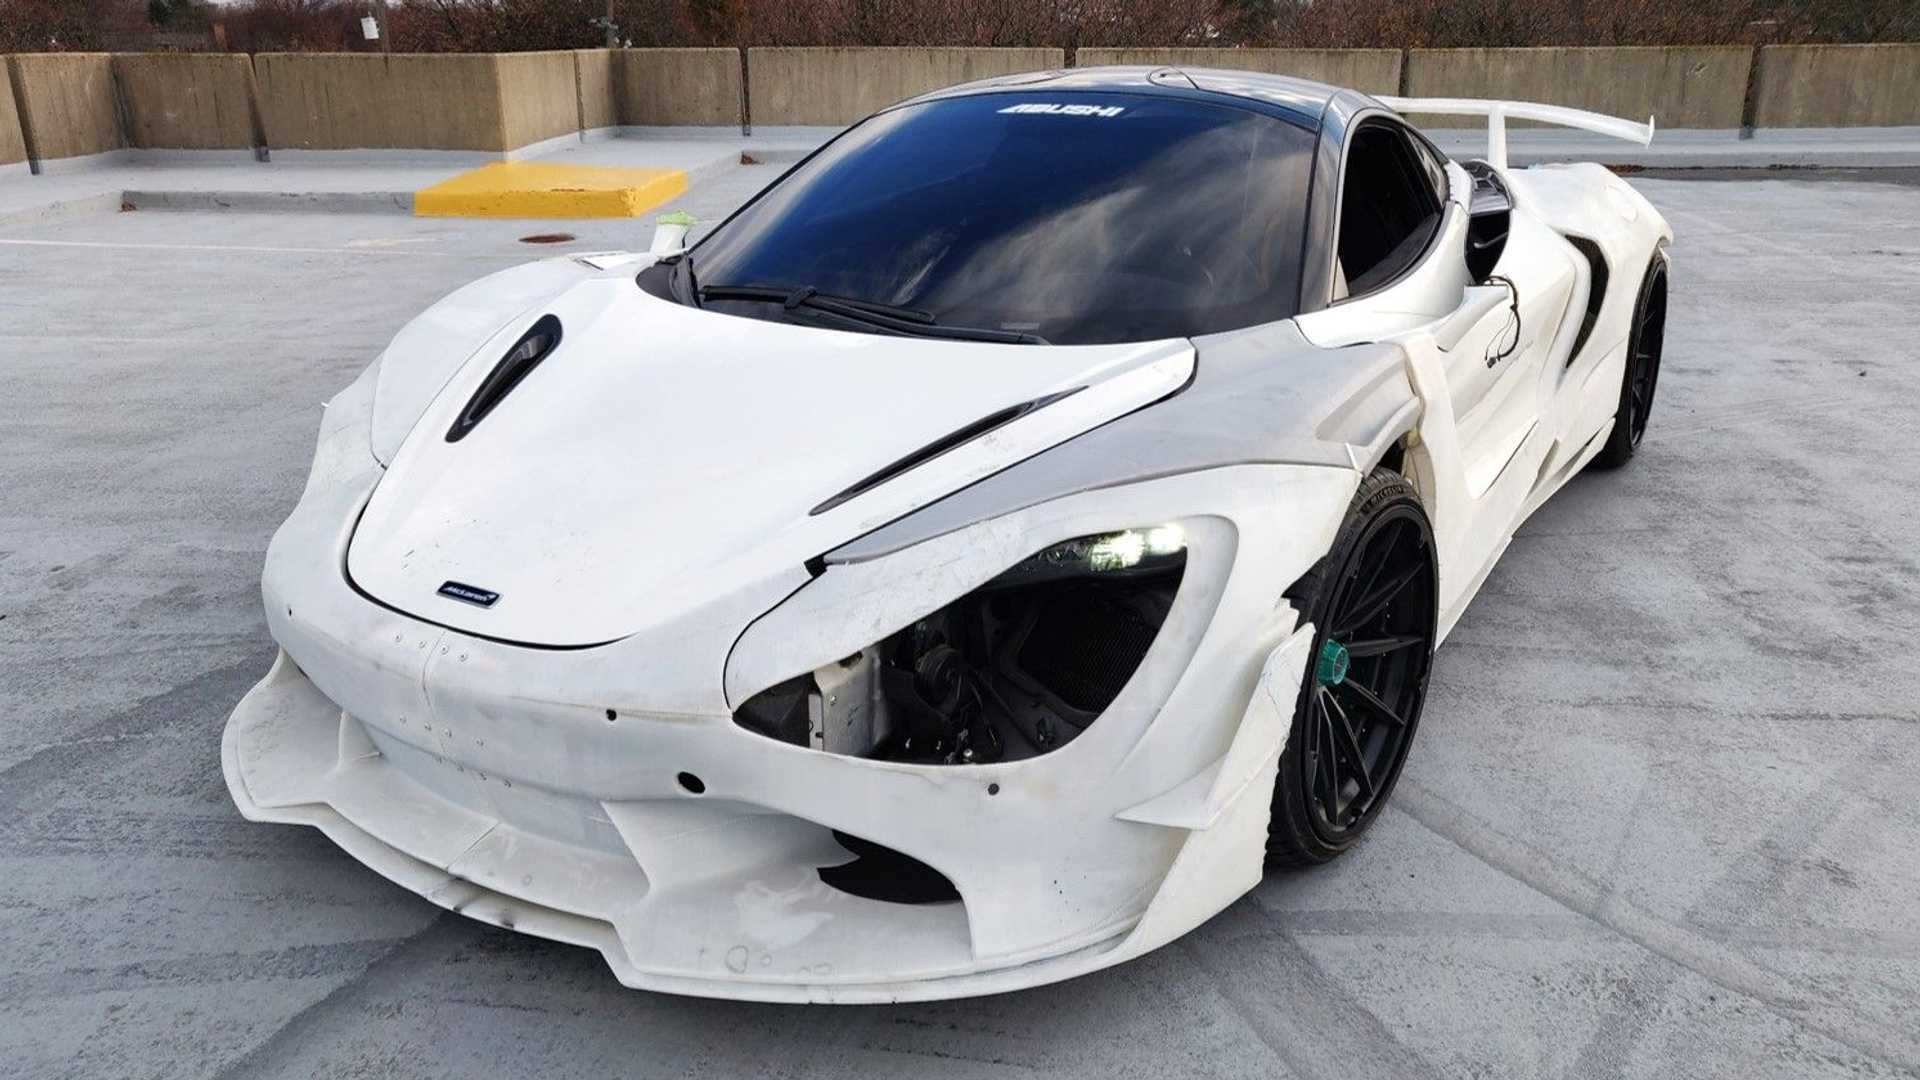 1016 Industries developing 3D-printed body kit for the McLaren 720S